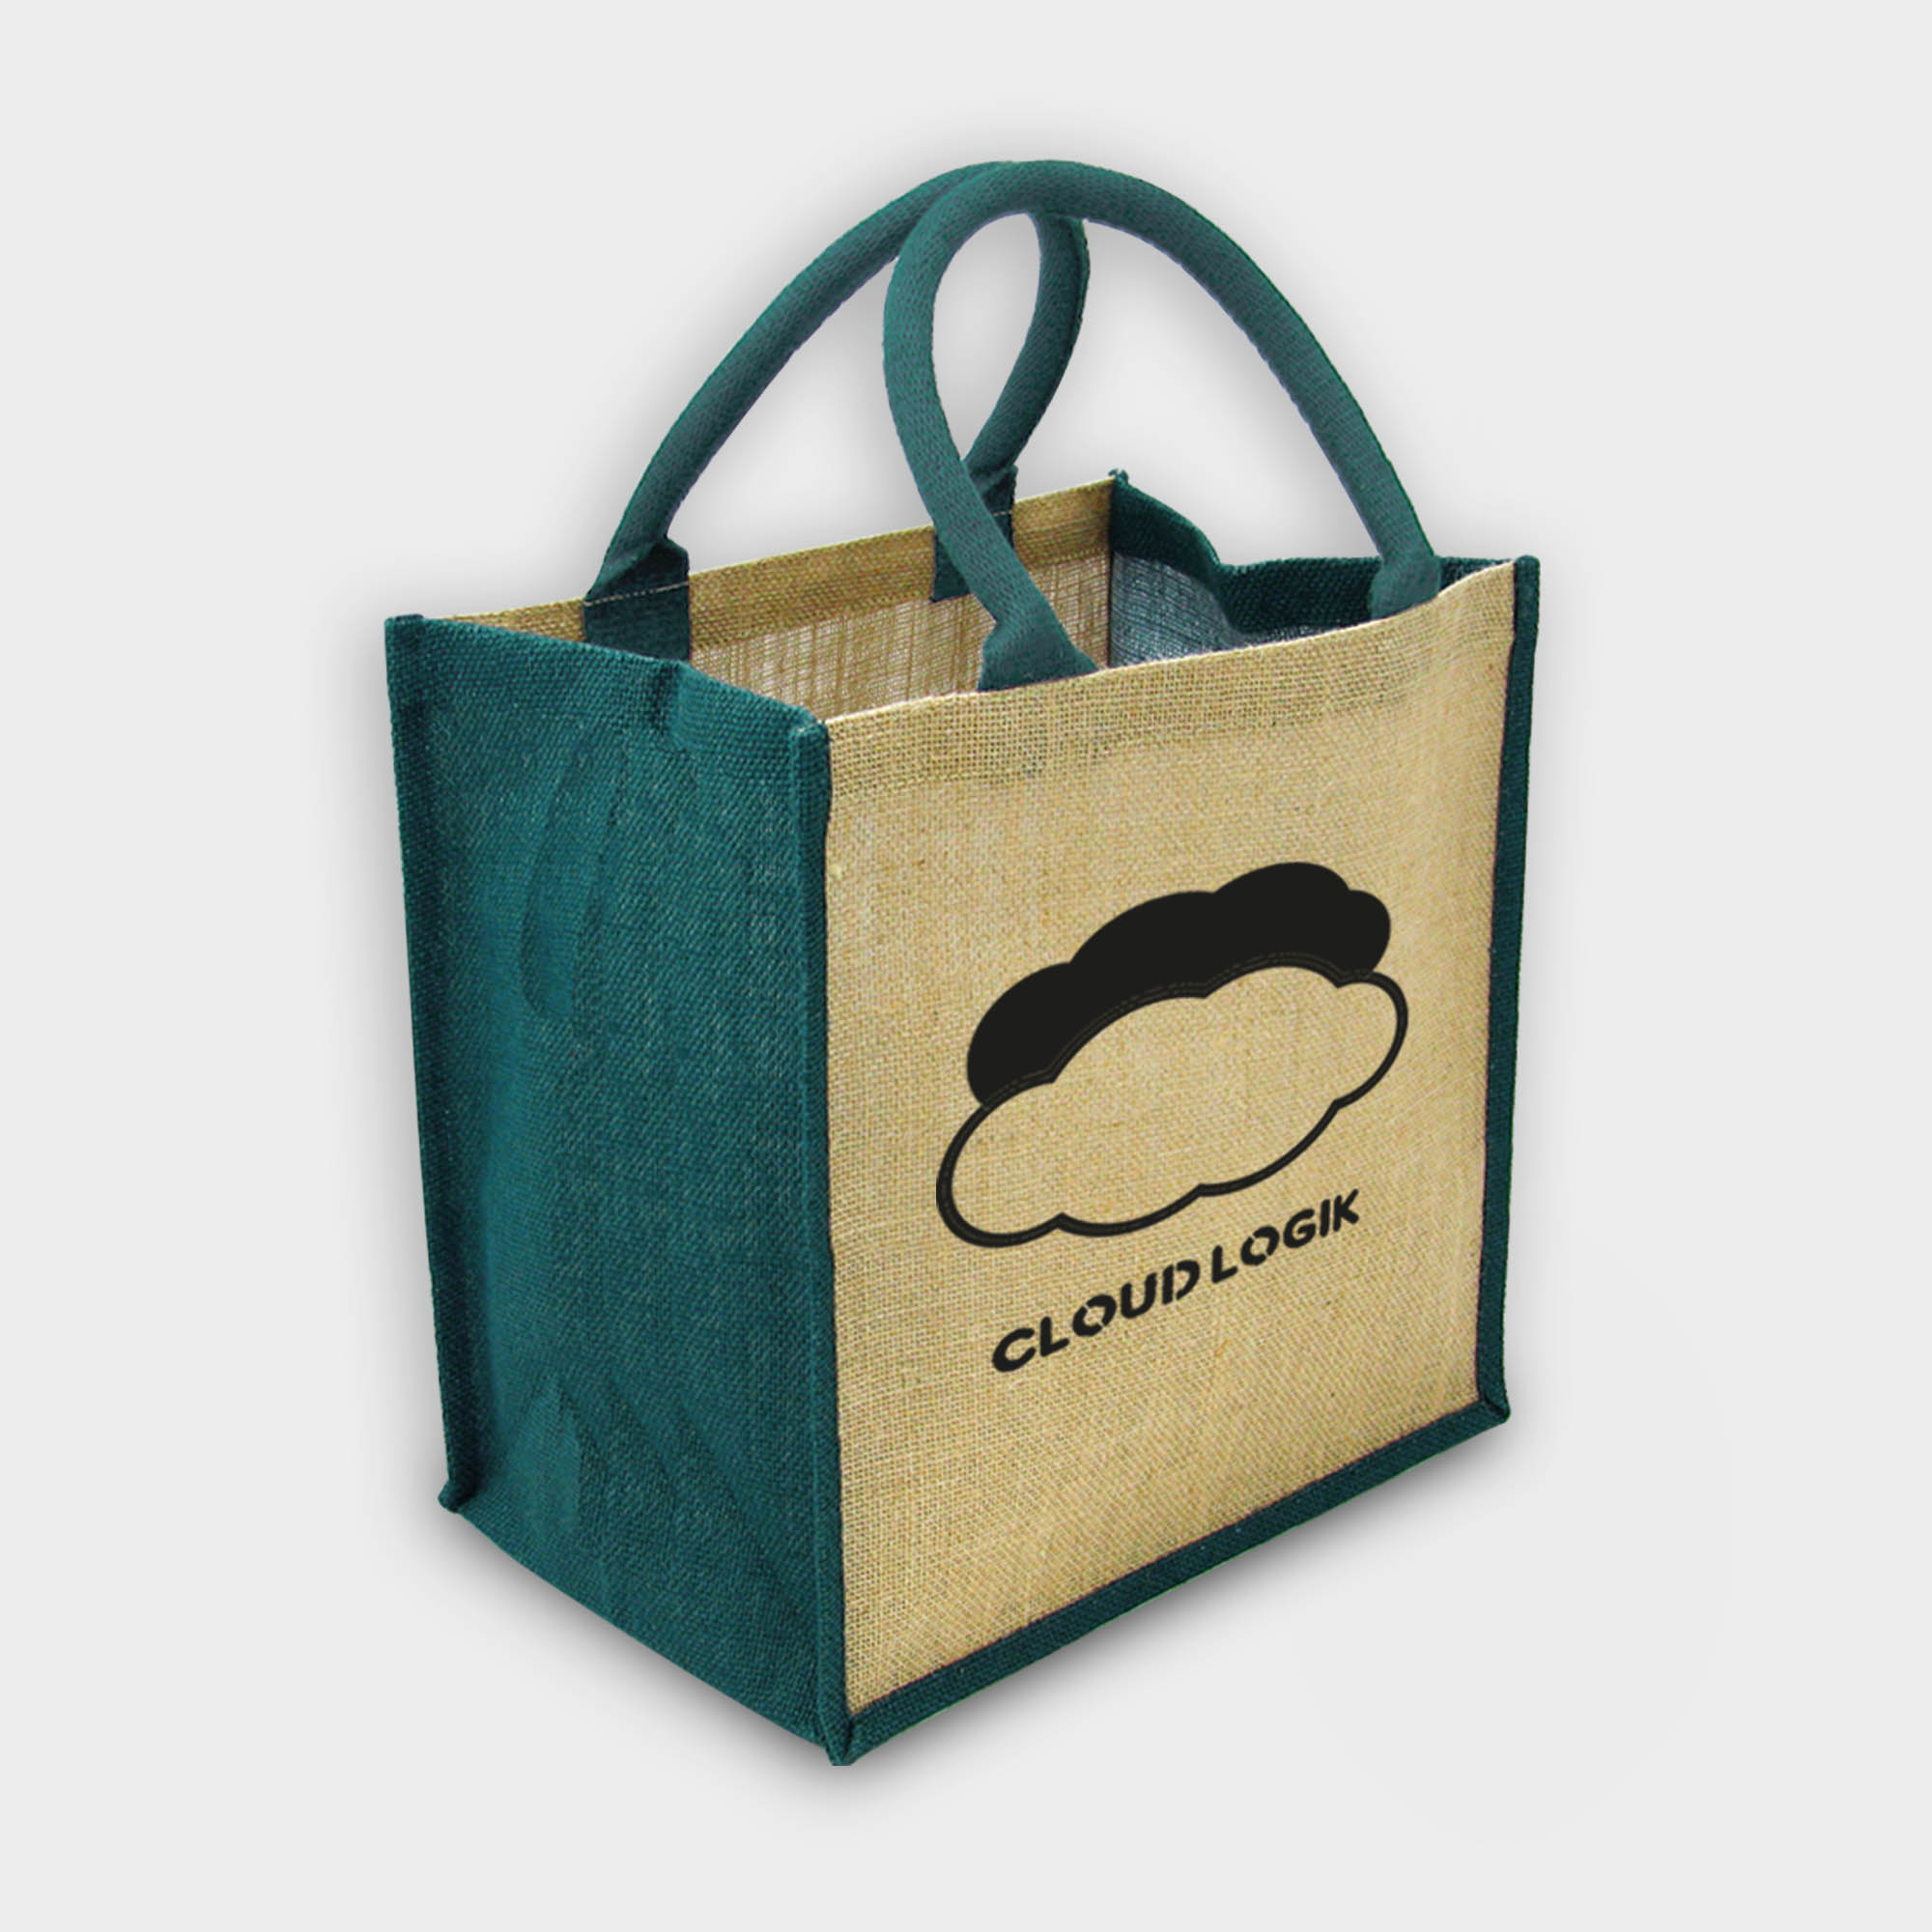 The Green & Good Brighton Jute Bag is made from natural and sustainable jute. Comes with coloured gussets in various colours. Popular shopping and gift bag with square format and cotton webbing over rope handles. Lined inside with a laminated surface for easy cleaning and sturdiness. Natural / Blue